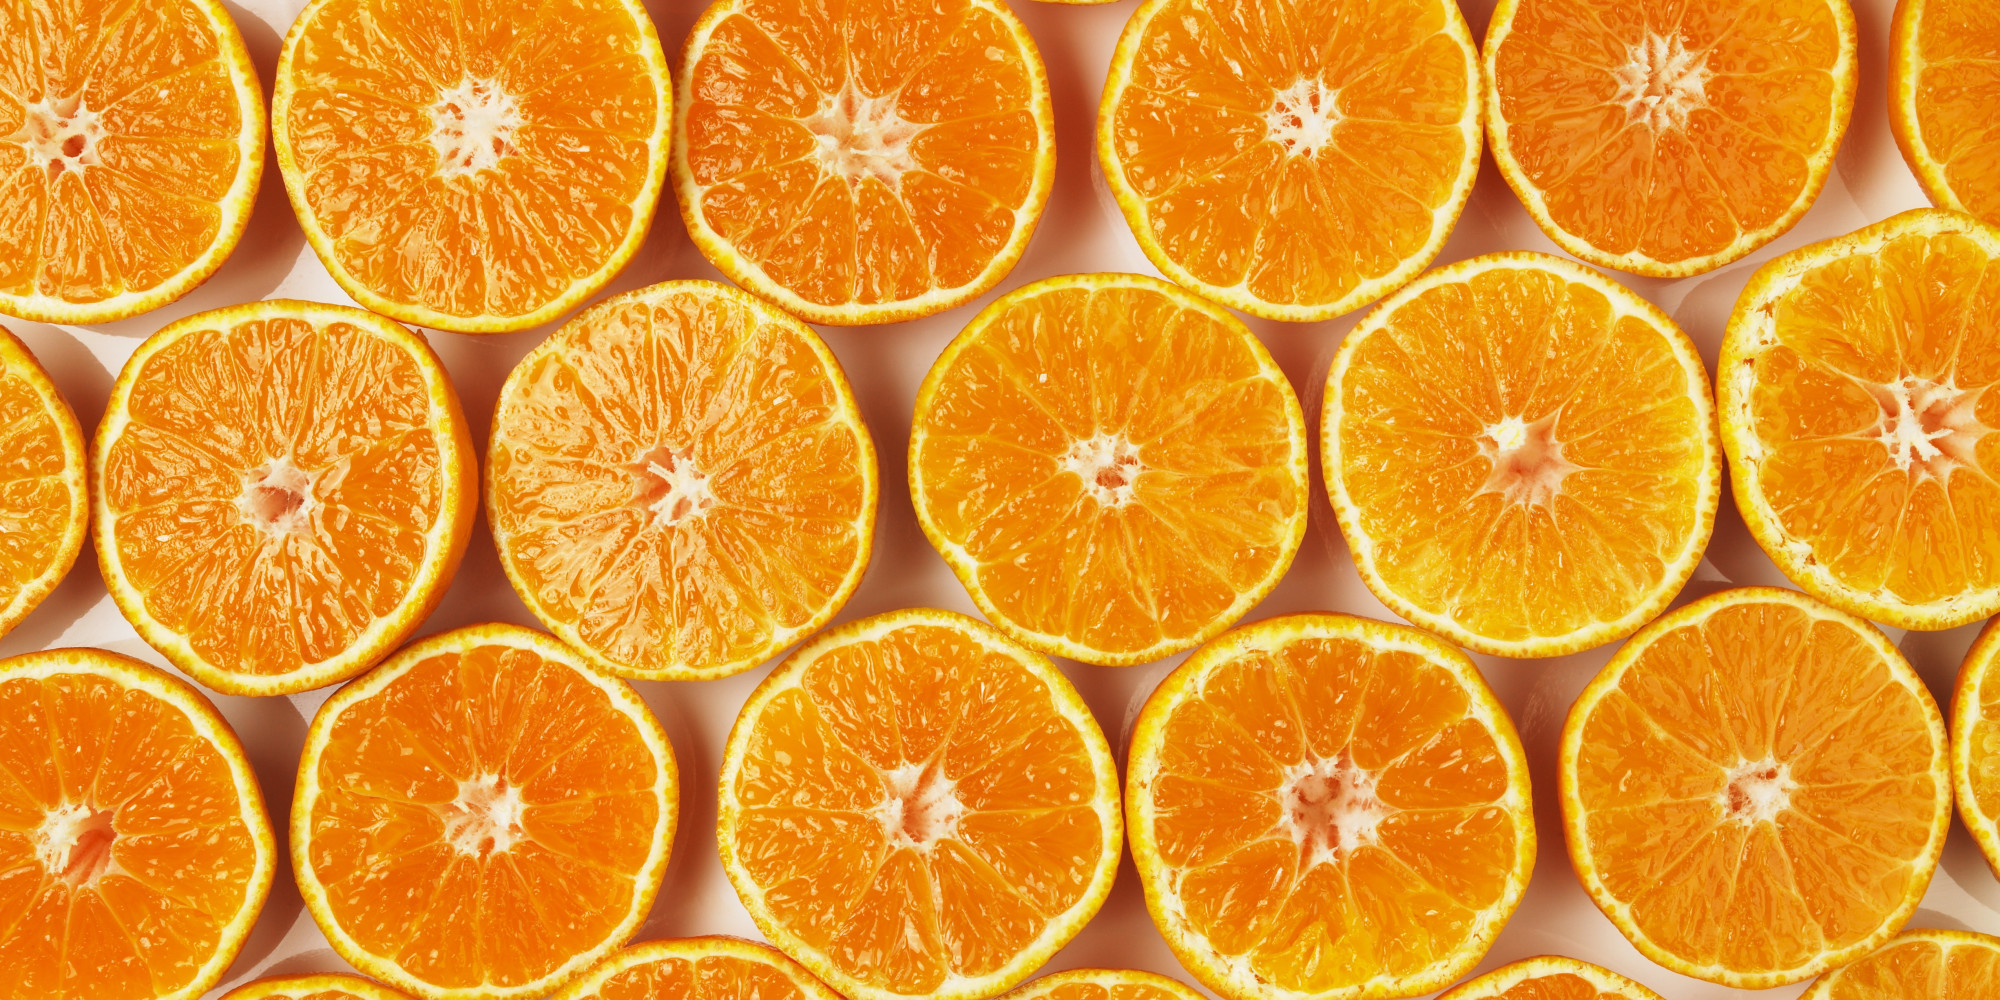 Greening-Resistant GMO Oranges Come One Step Closer To ...
